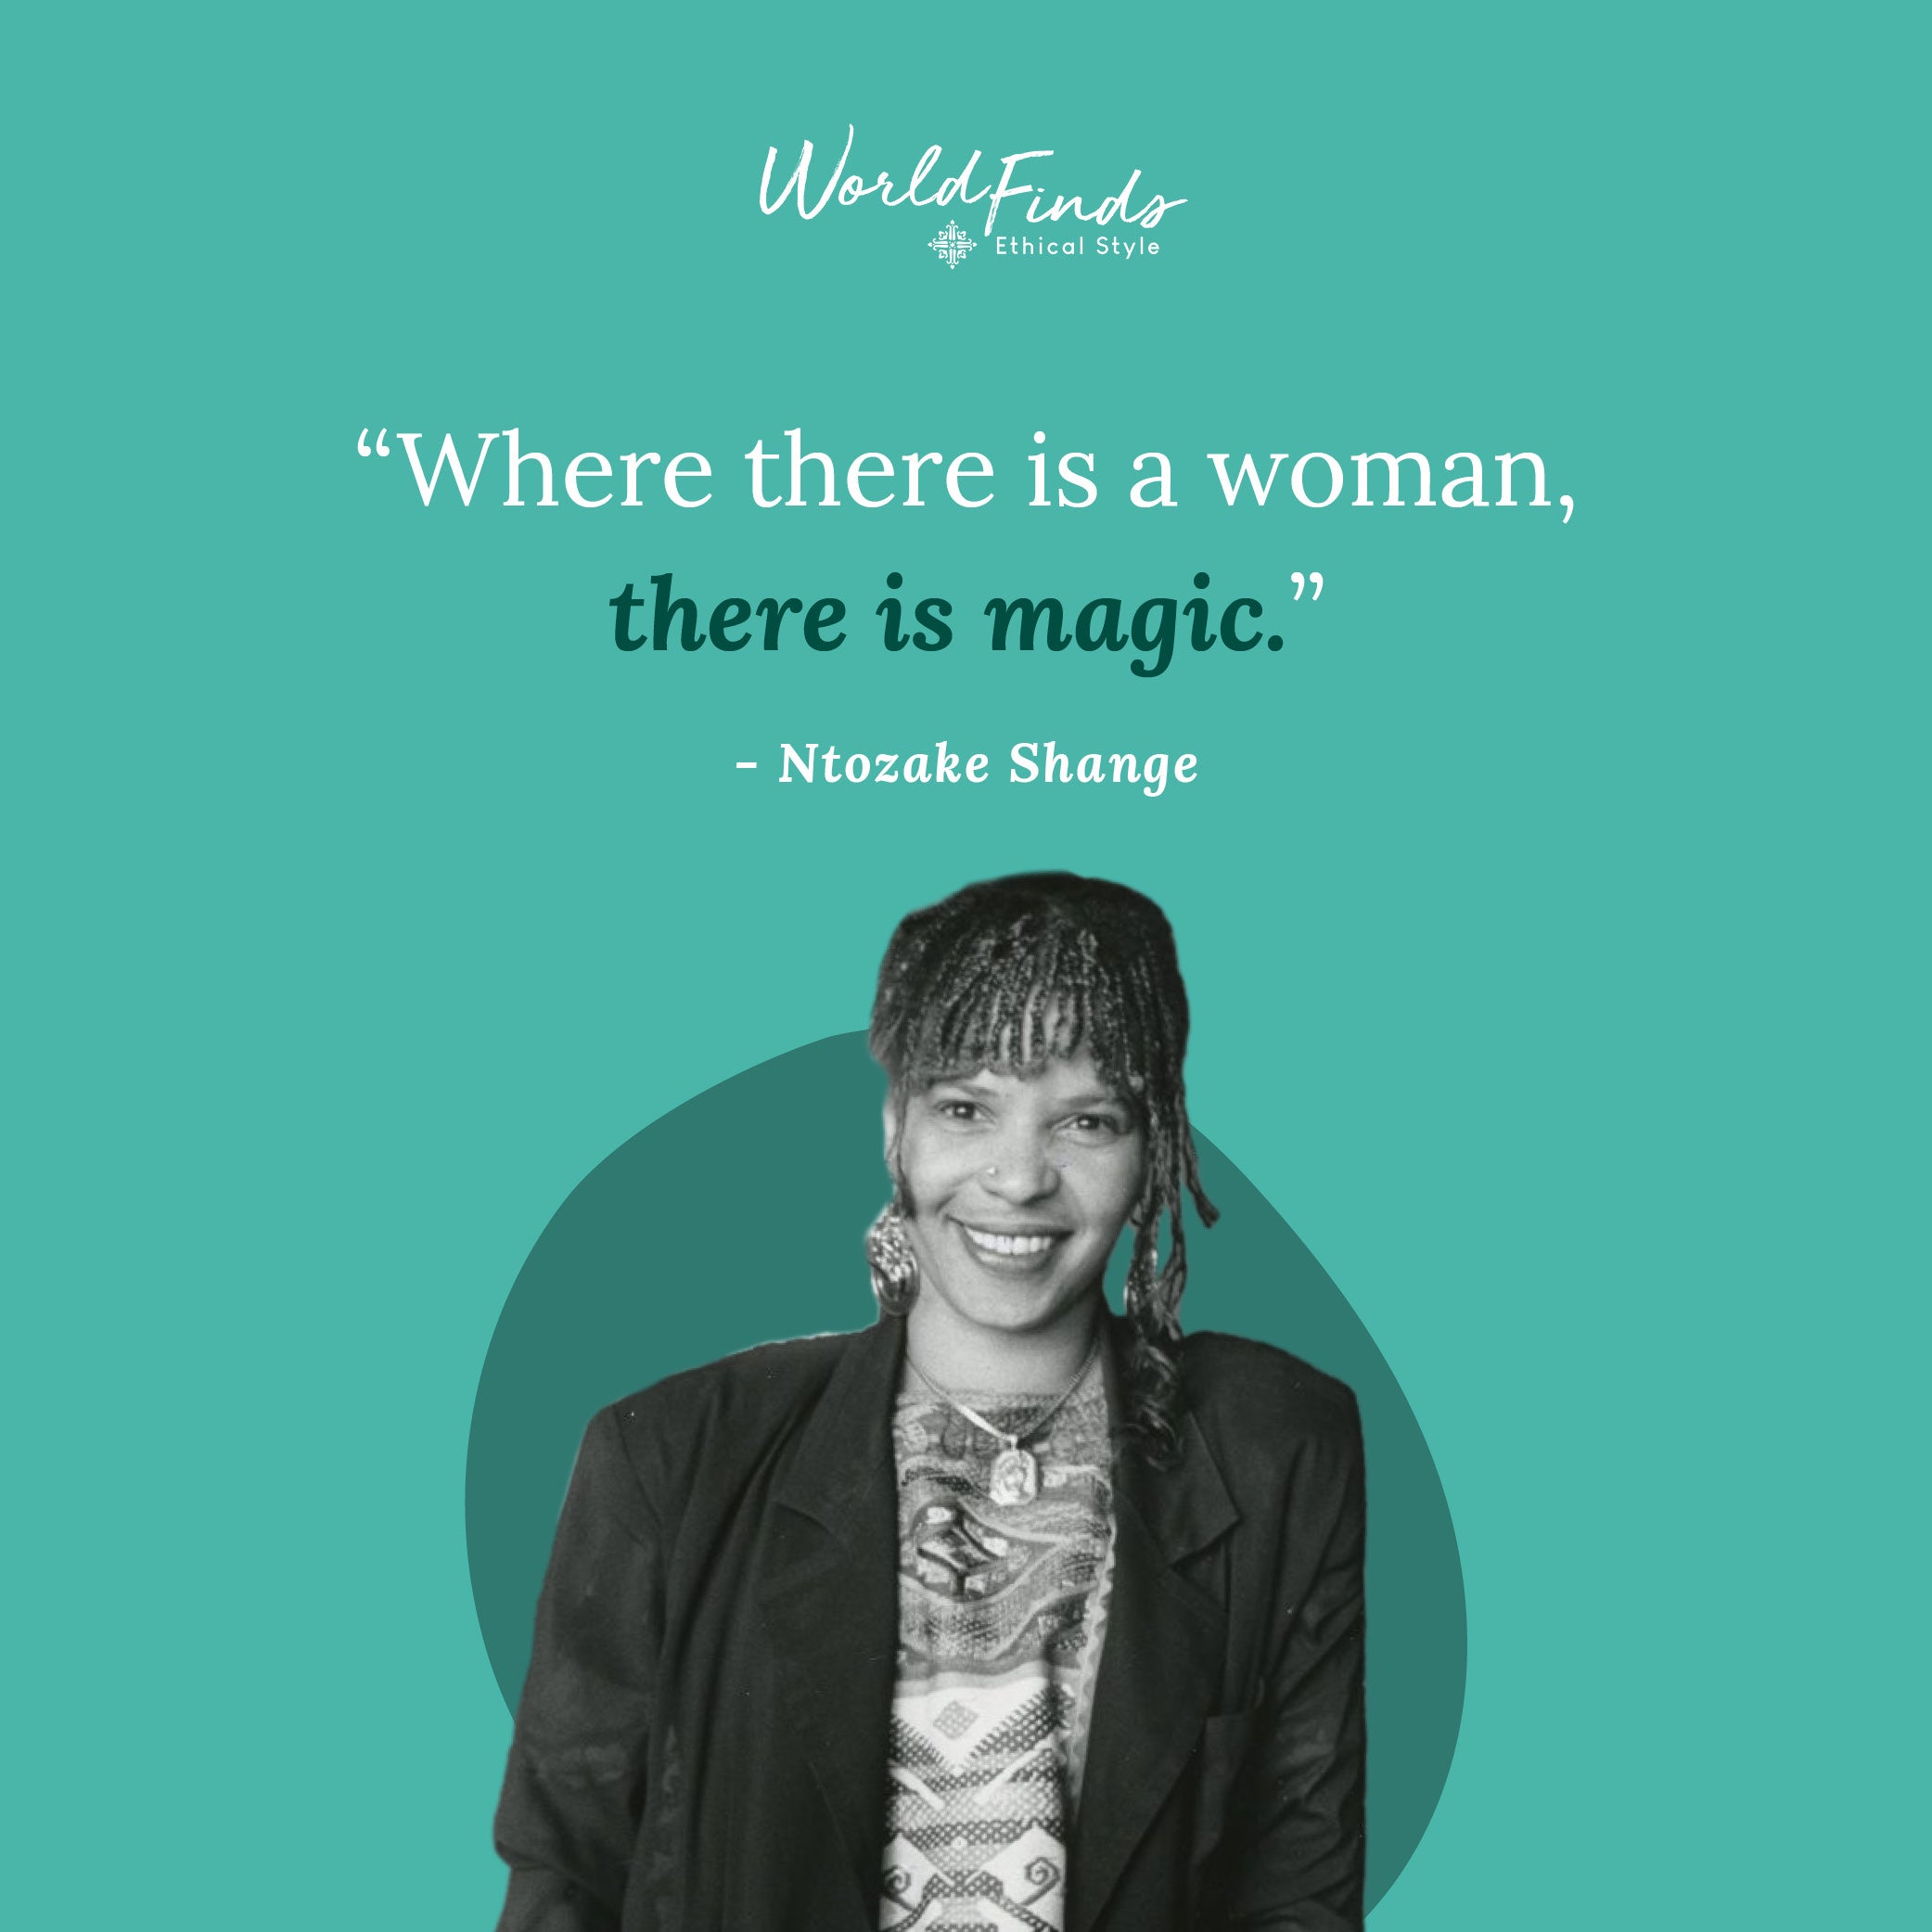 Quote from Ntozake Shange, "Where there is a woman, there is magic."